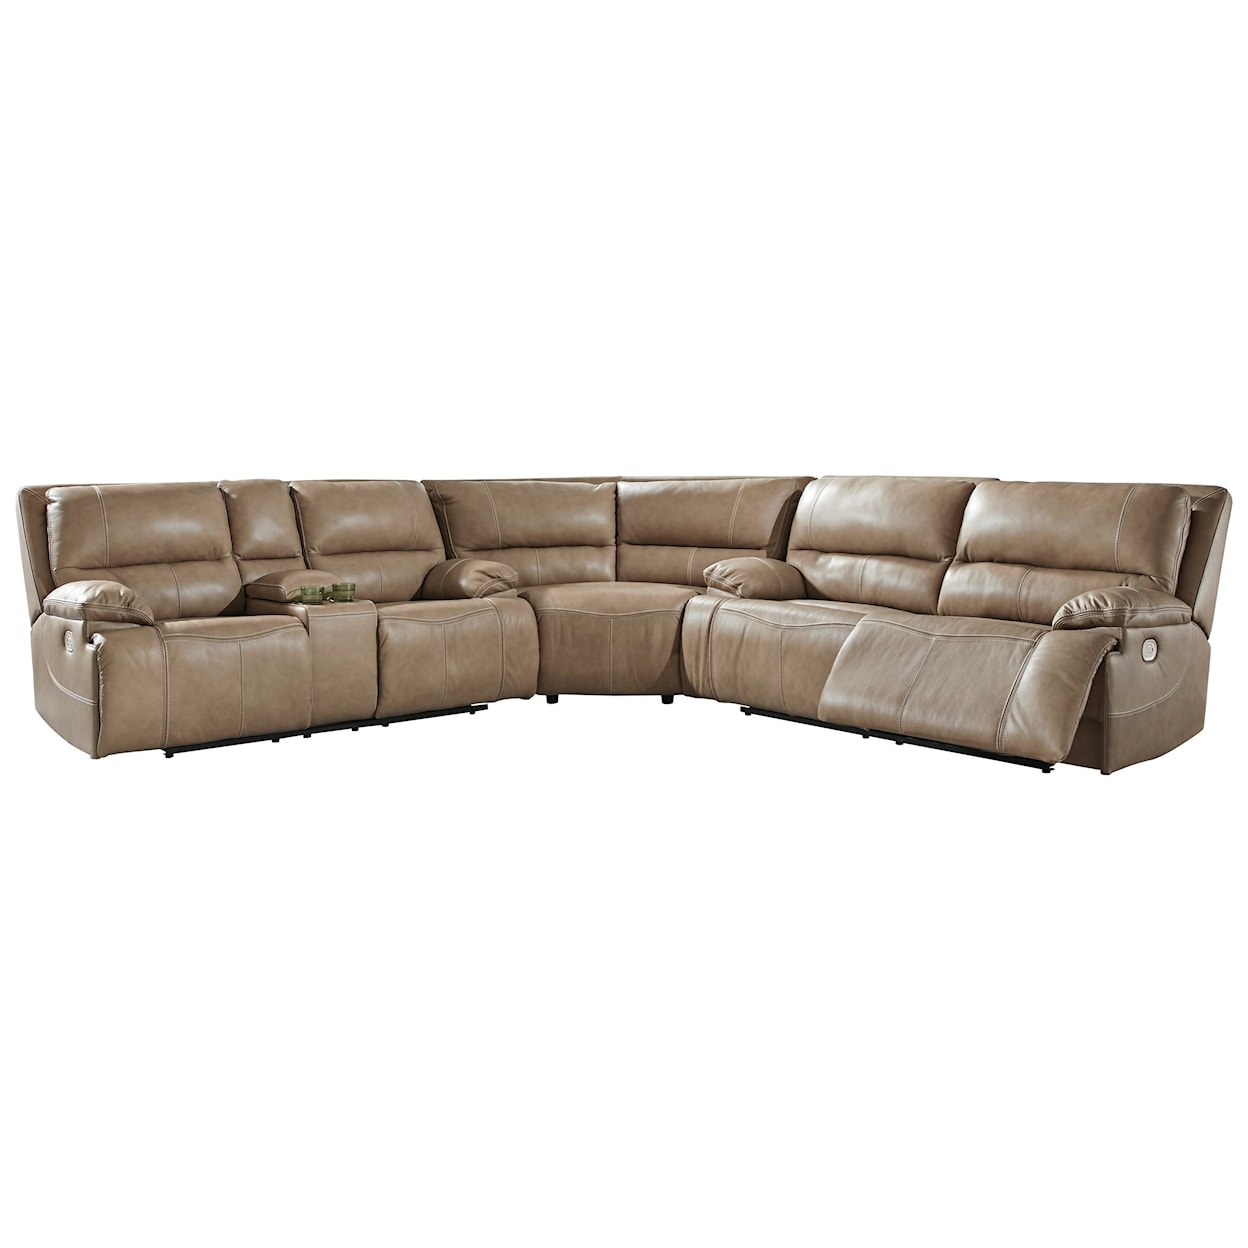 Signature Design by Ashley Ricmen 3-Piece Power Reclining Sectional